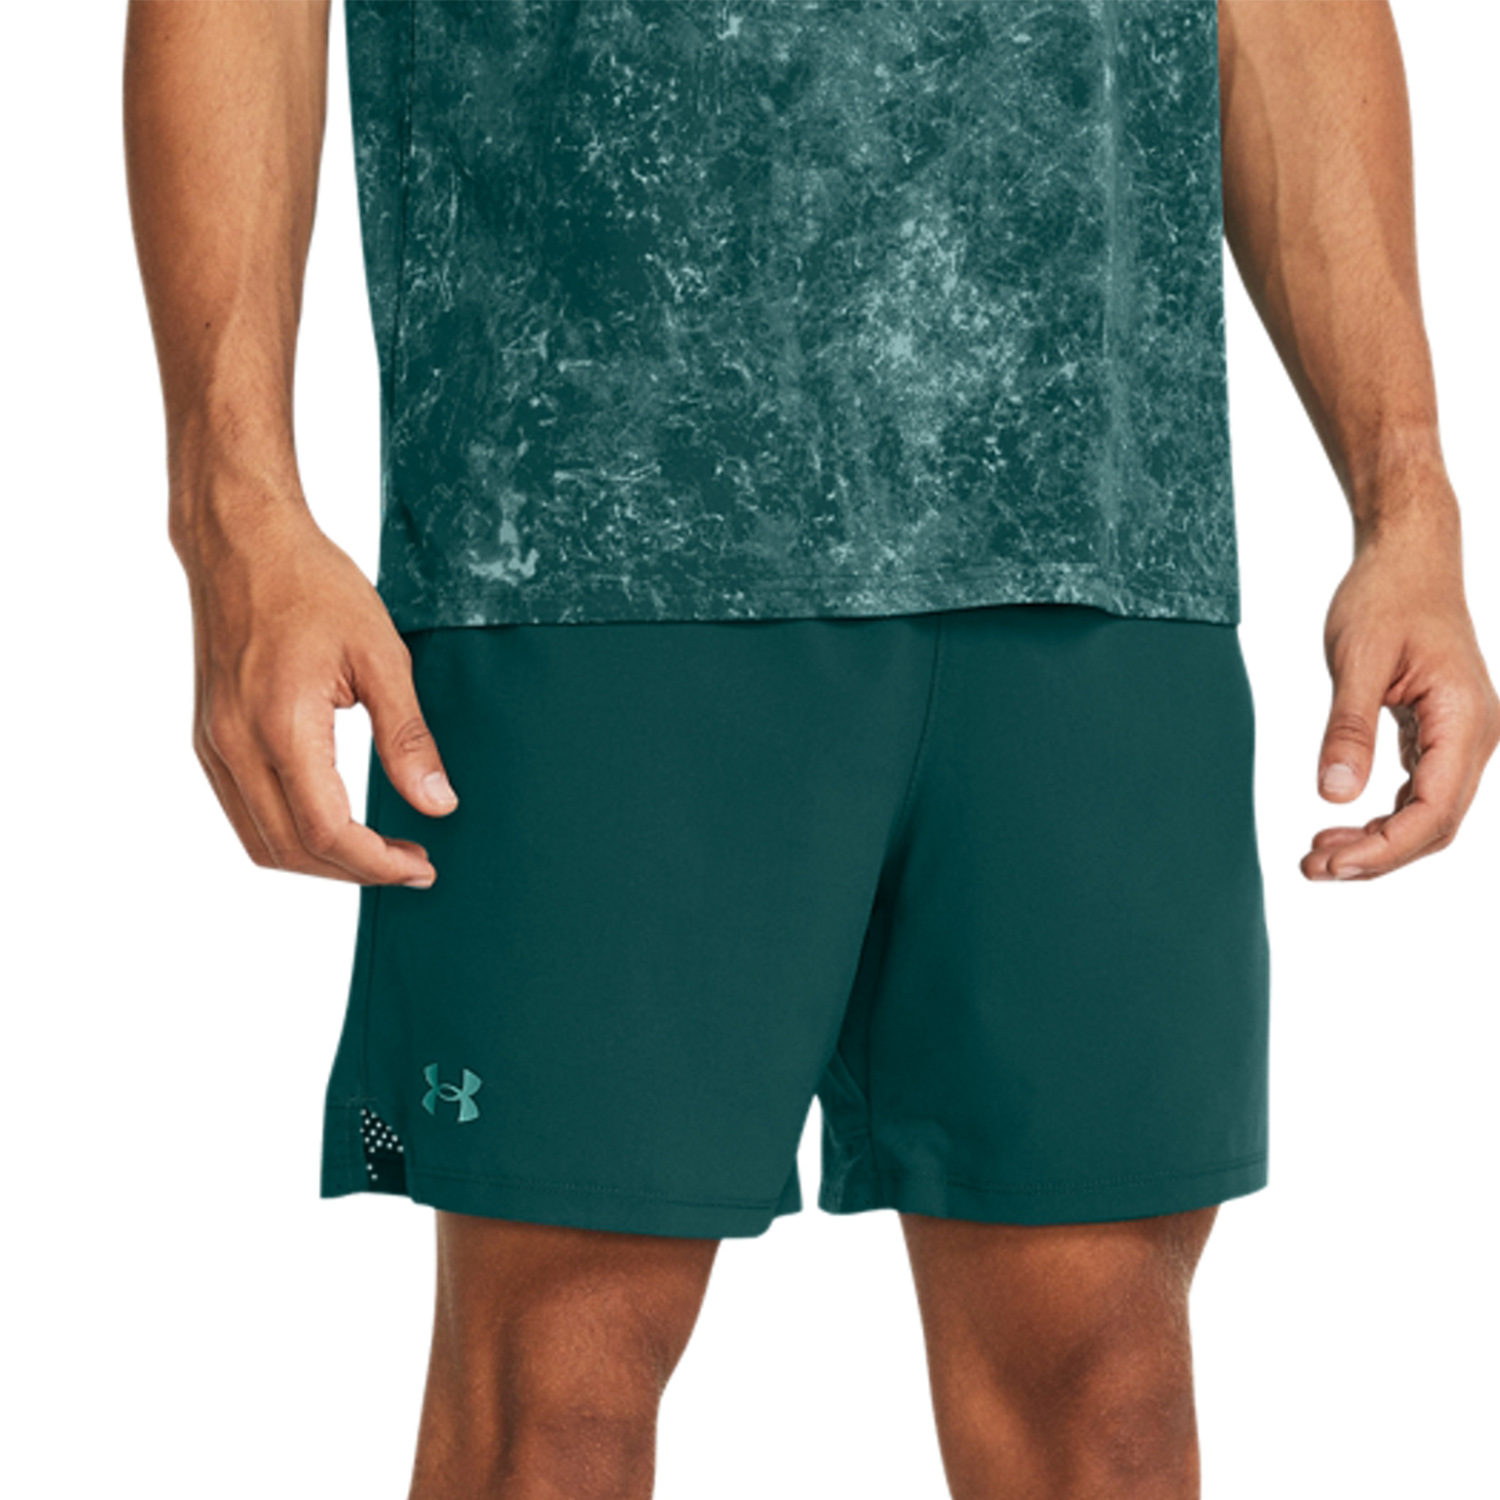 Under Armour Vanish Woven 6in Shorts - Hydro Teal/Radial Turquoise